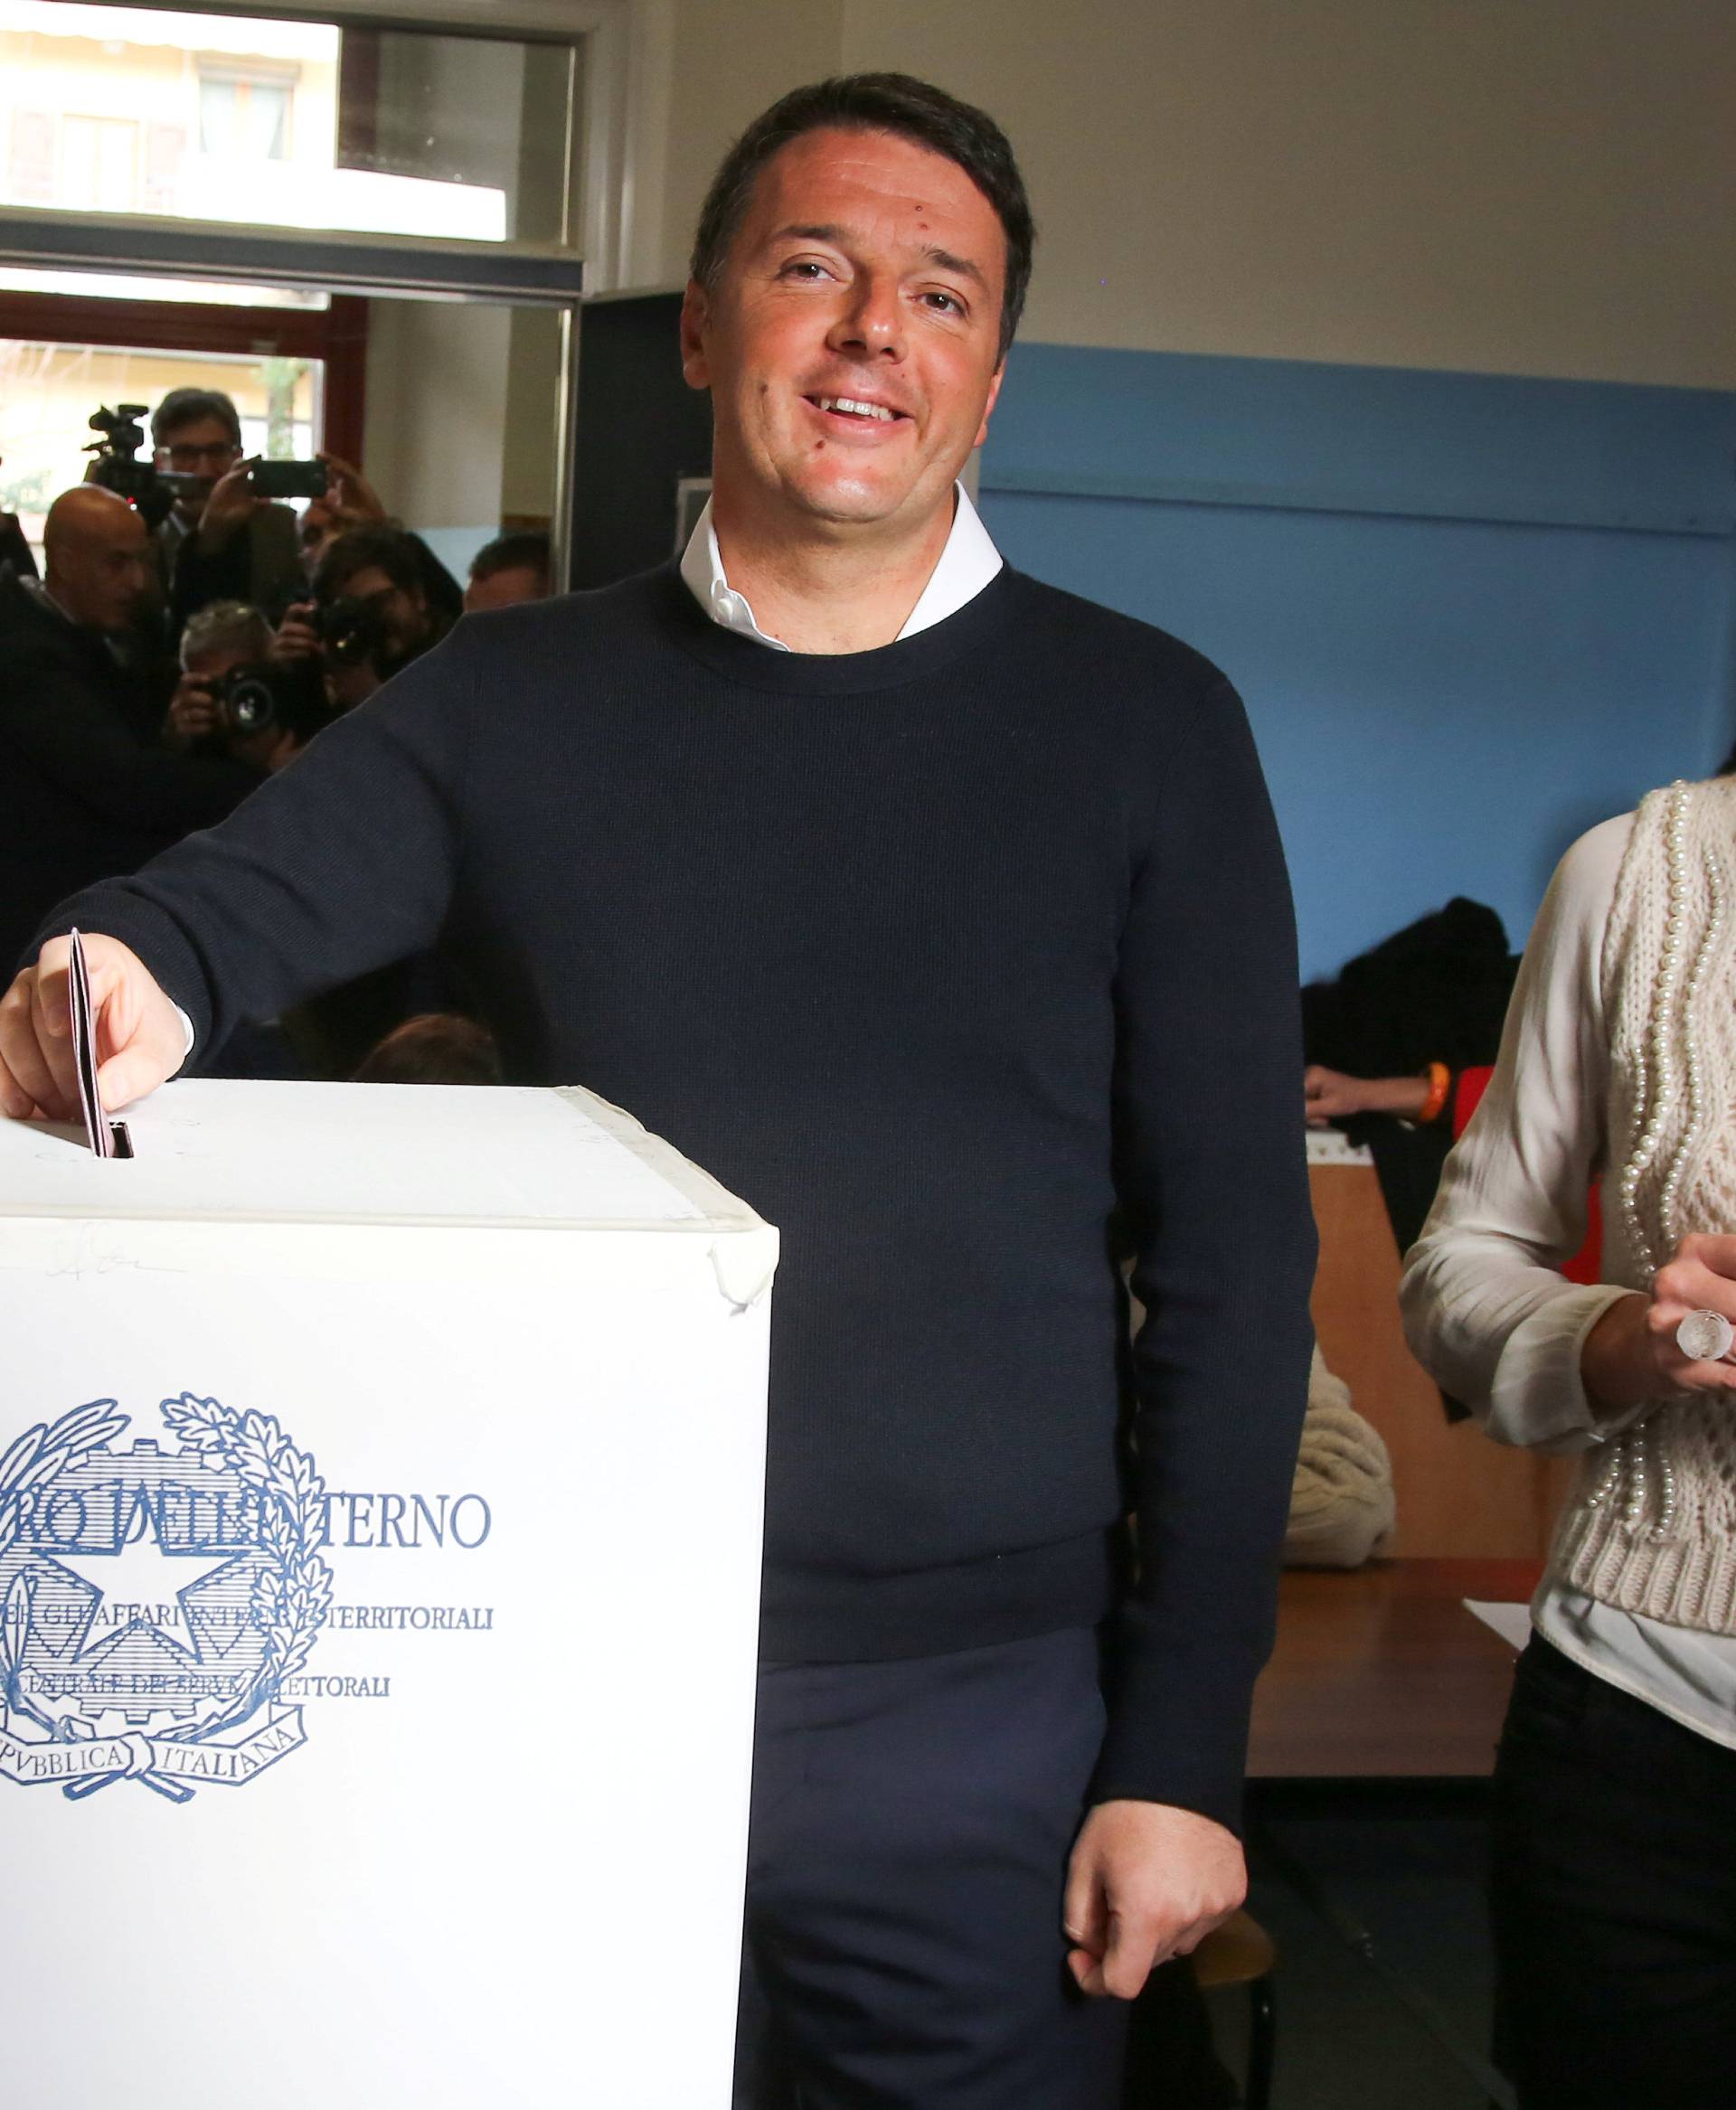 Italian Prime Minister Matteo Renzi casts his vote for the referendum on constitutional reform as he is flanked by his wife Agnese, in Pontassieve